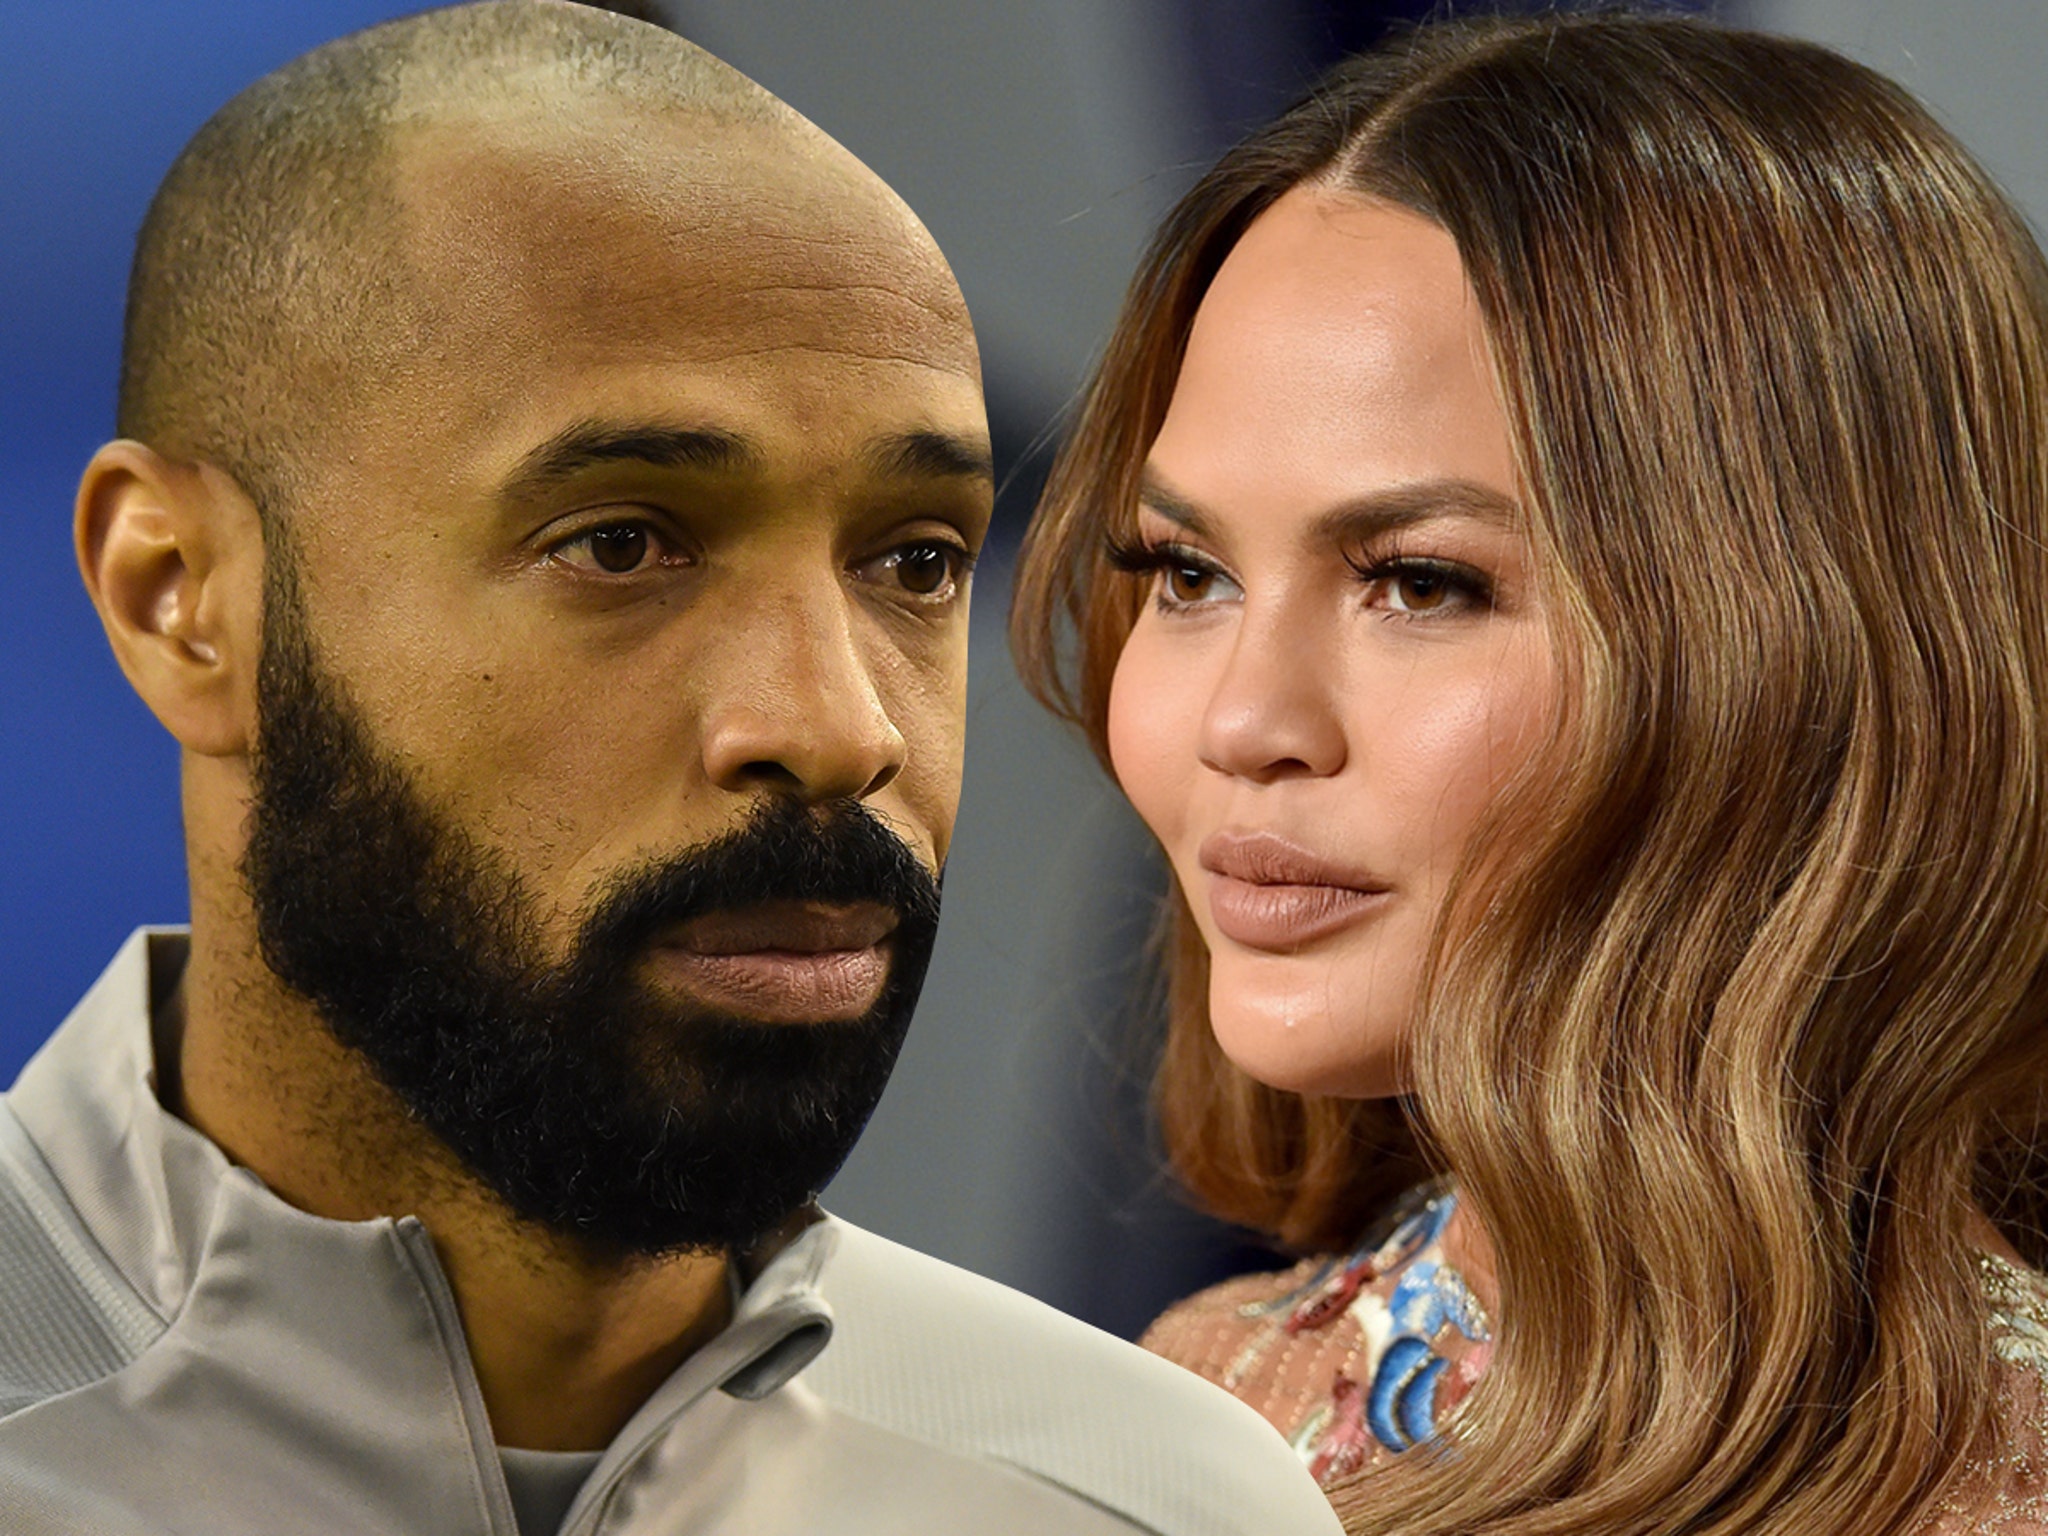 Soccer Legend Thierry Henry Follows Chrissy Teigen's Lead, Ditches